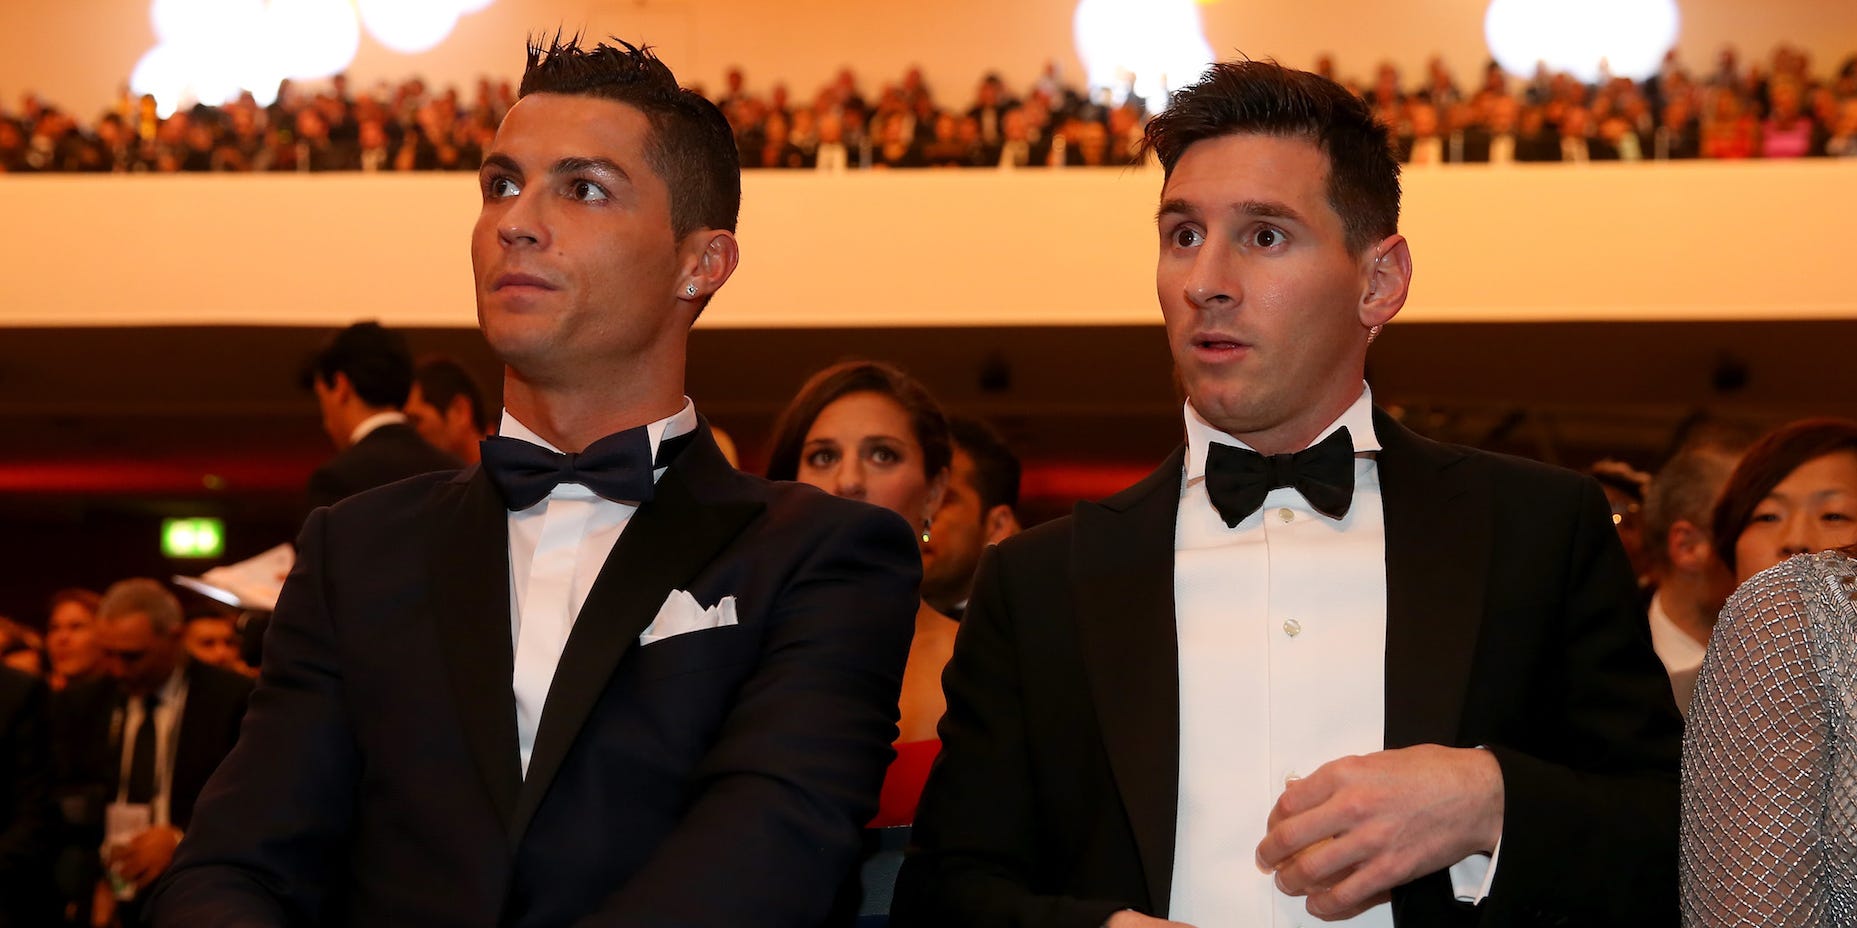 FIFA Ballon d'Or nominee Cristiano Ronaldo of Portugal and Real Madrid sits with FIFA Ballon d'Or nominee Lionel Messi of Argentina and Barcelona during the FIFA Ballon d'Or Gala 2015 at the Kongresshaus